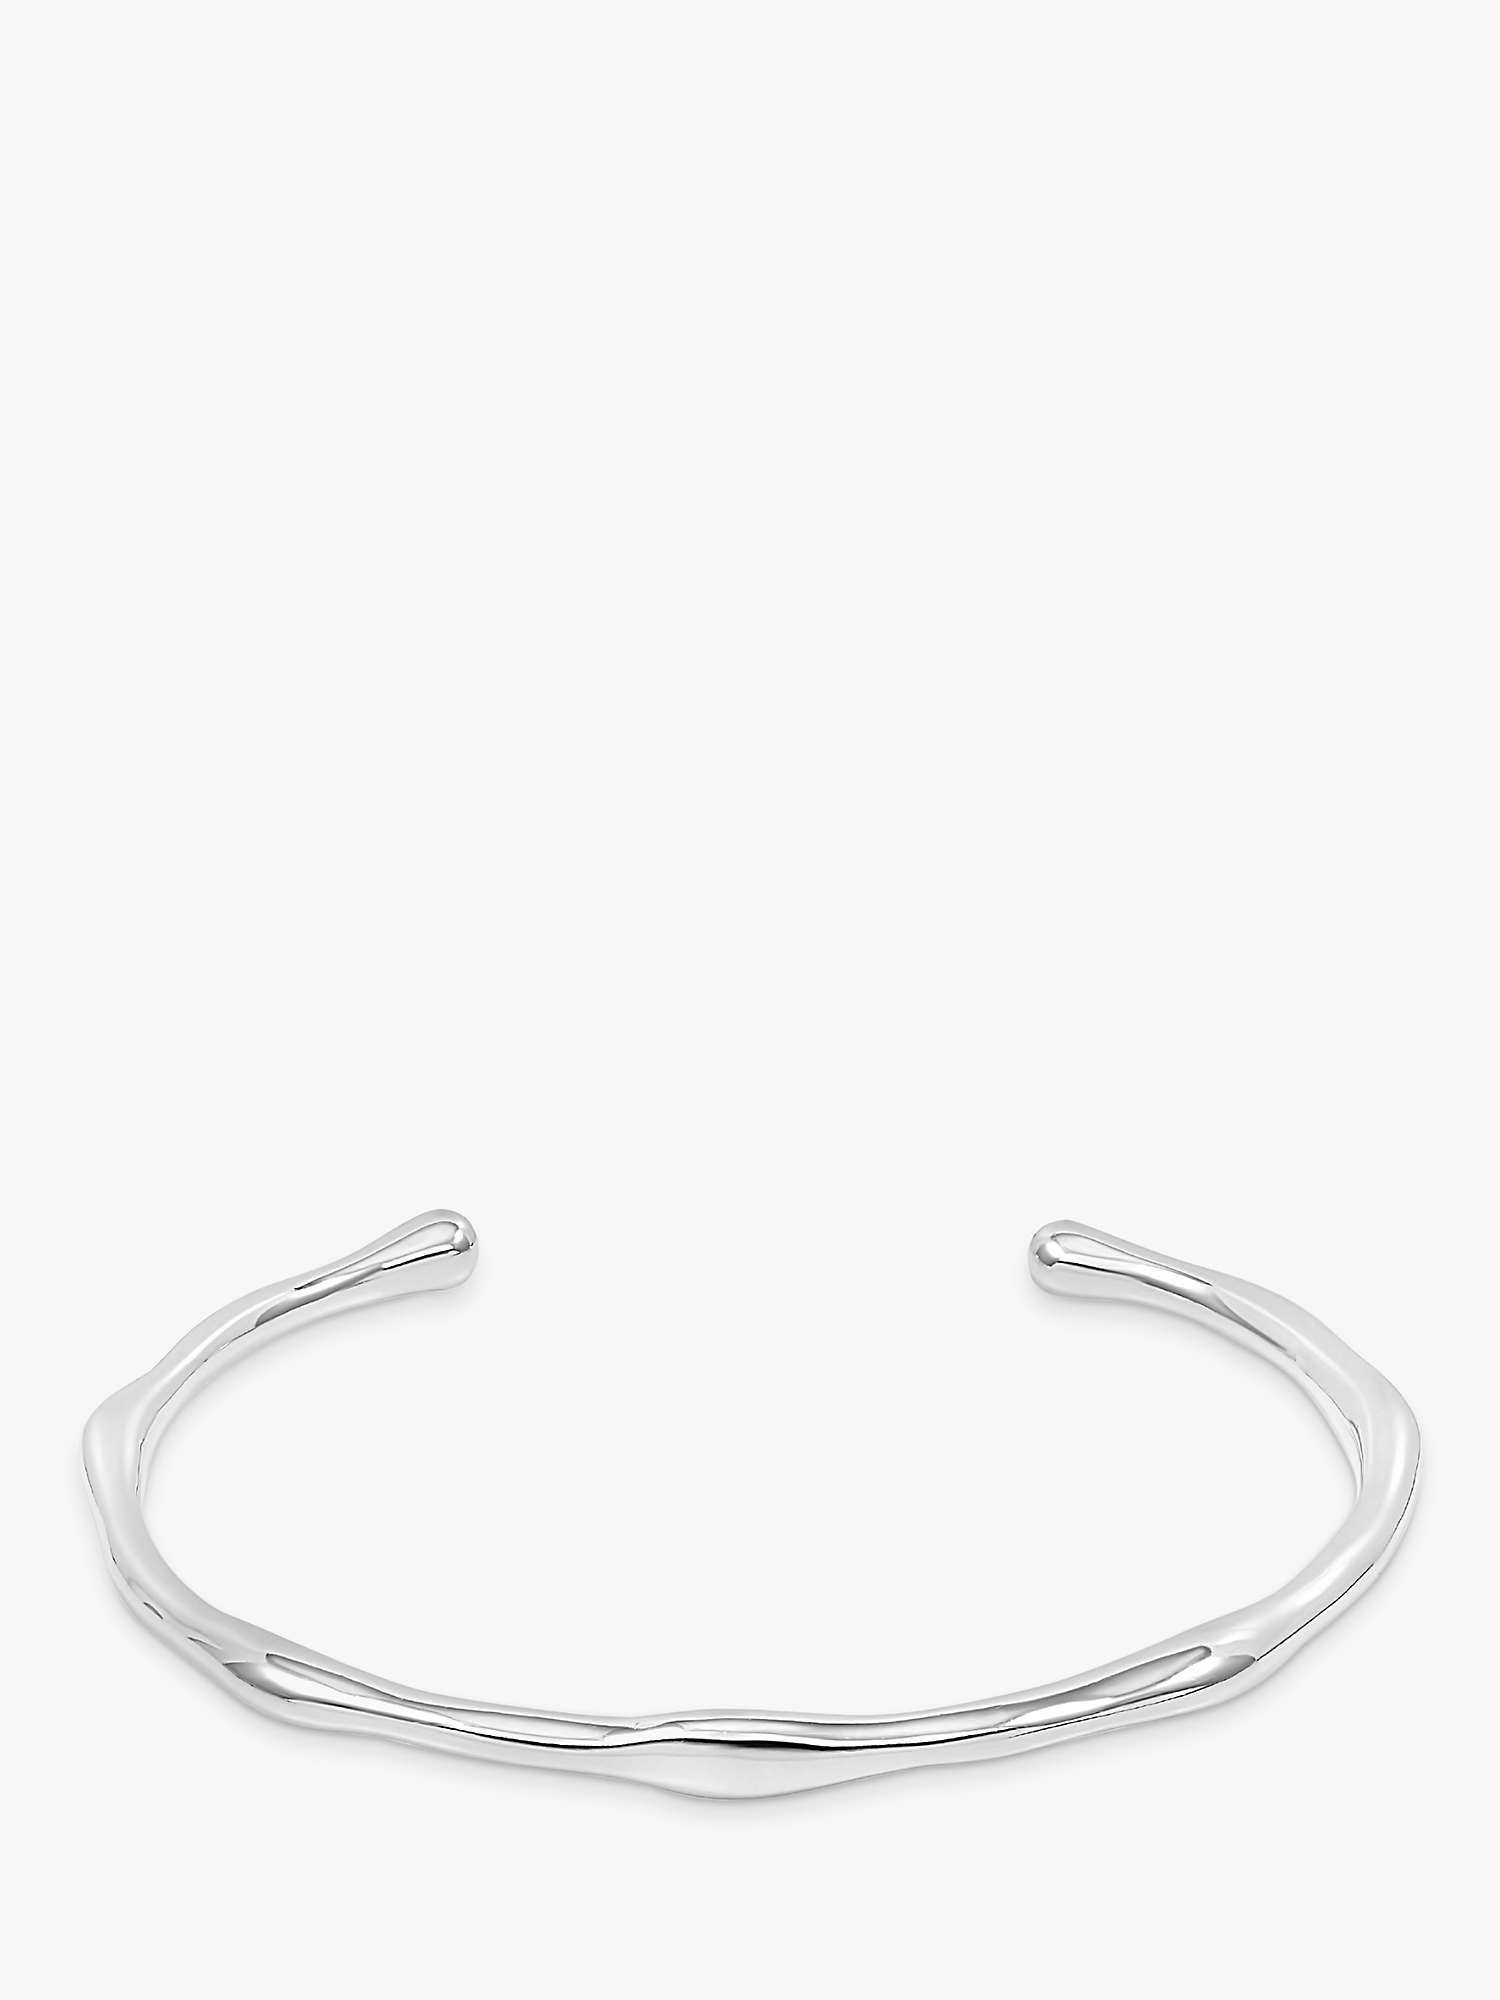 Buy Dower & Hall Waterfall Torque Bangle Online at johnlewis.com